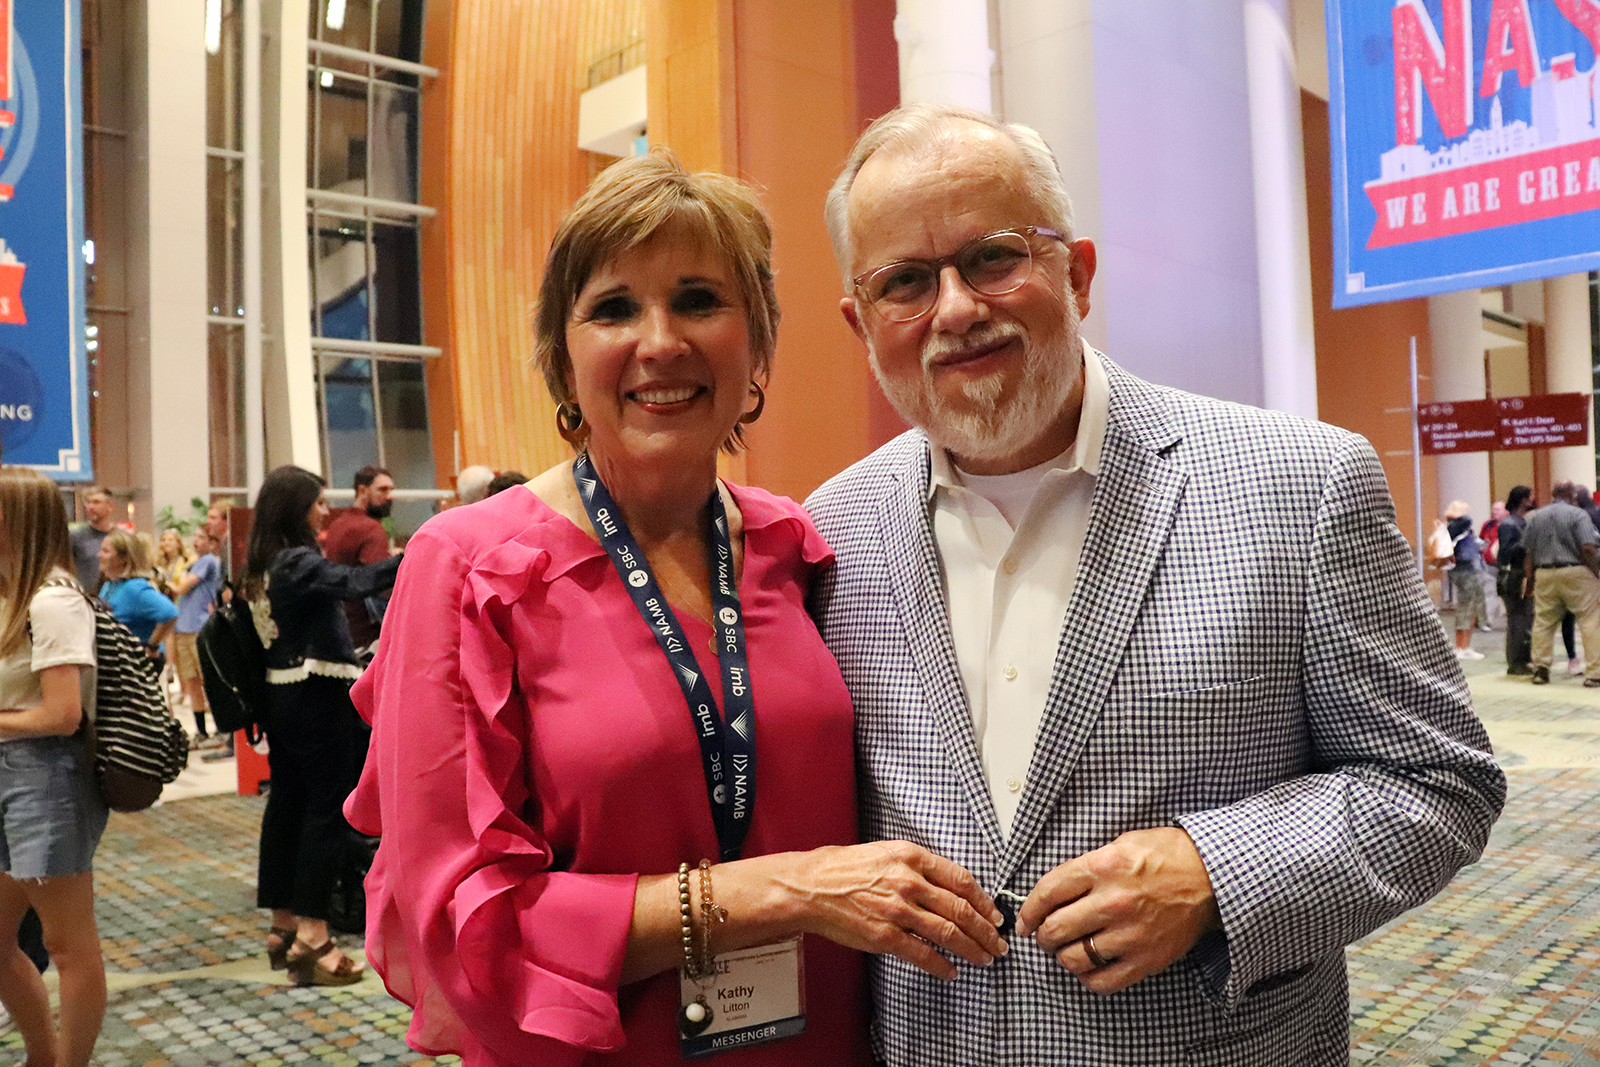 Kathy and Ed Litton at the Southern Baptist Convention in Nashville. RNS photo by Adelle M. Banks